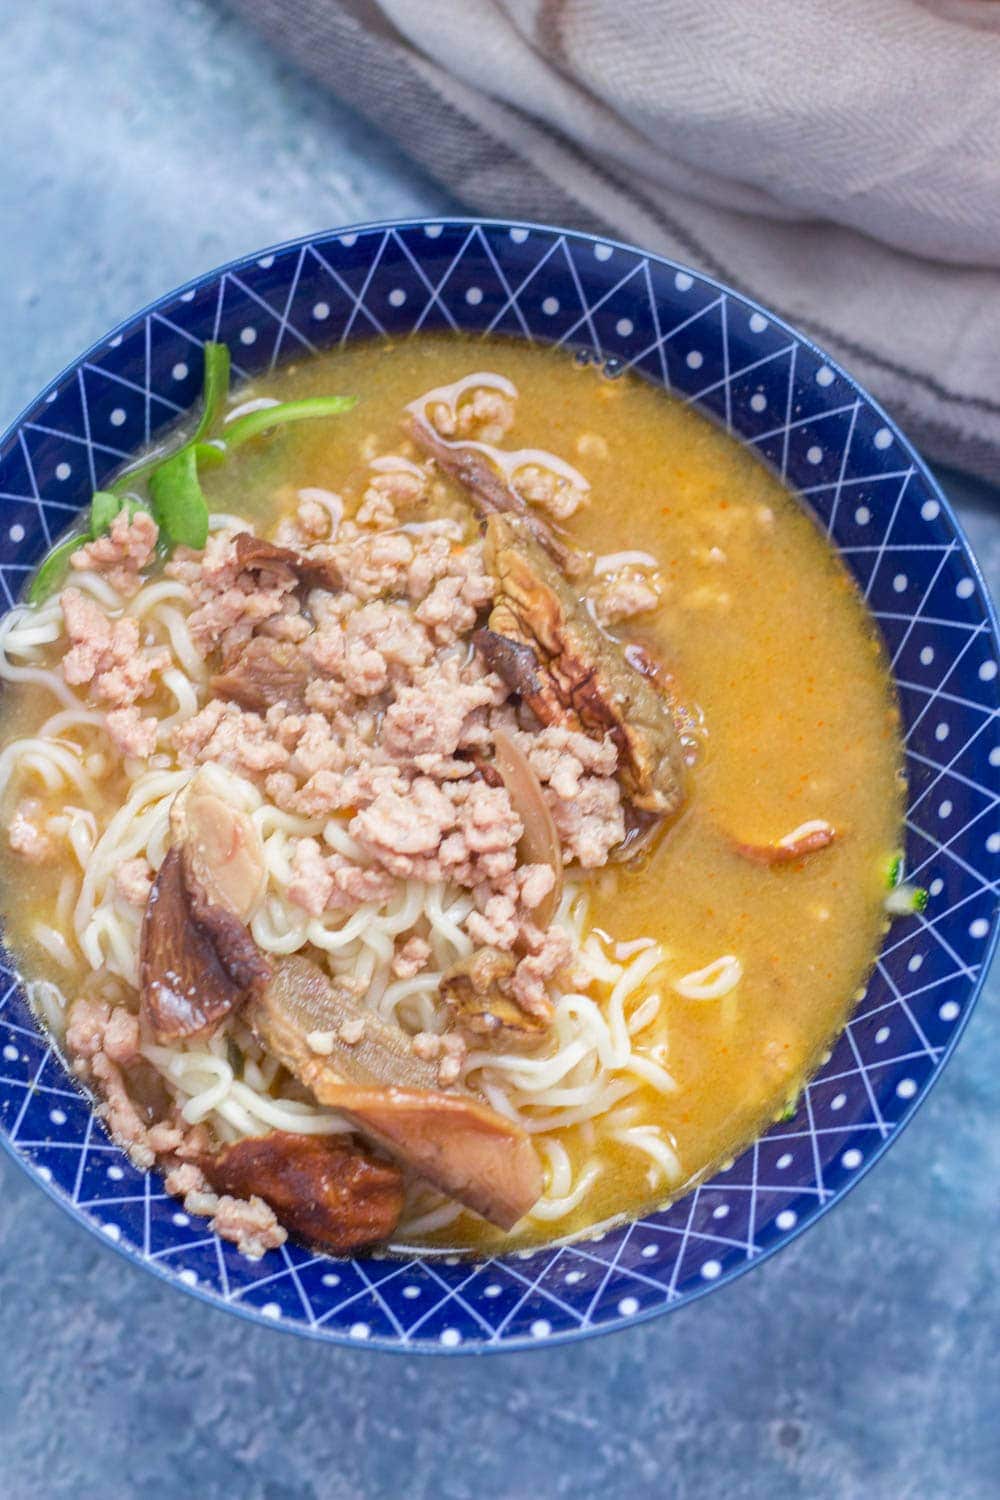 Make this pork and courgette ramen recipe for a quick weeknight dinner. Now you can have ramen on the table in less than half an hour!